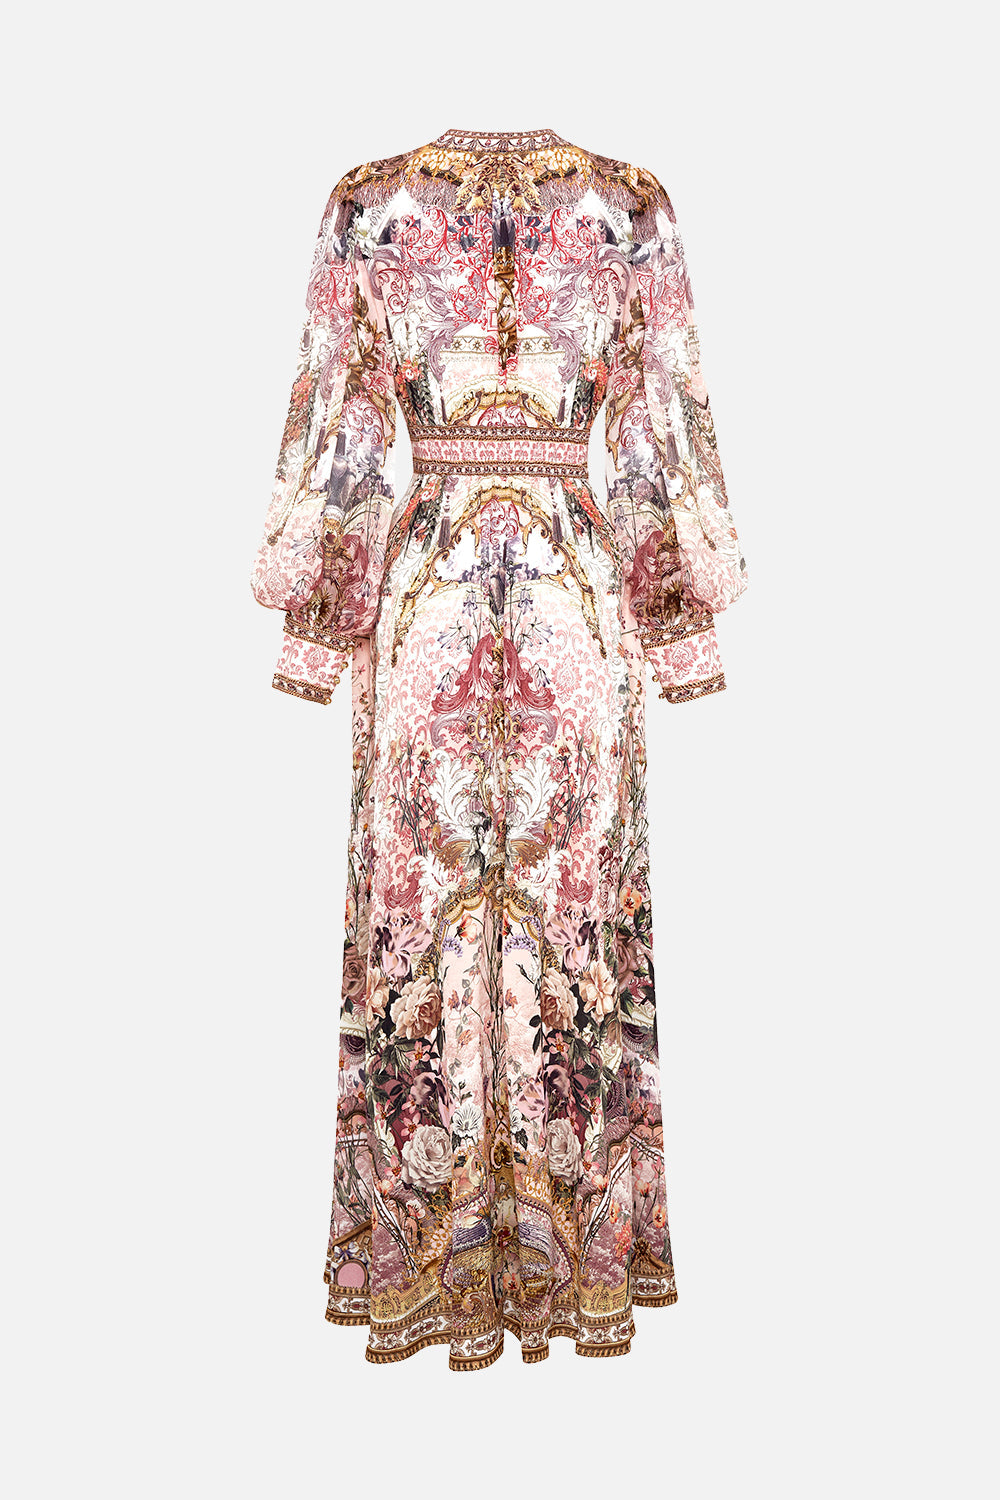 Back product view of CAMILLA silk floral maxi dress in Kissed By The Prince print